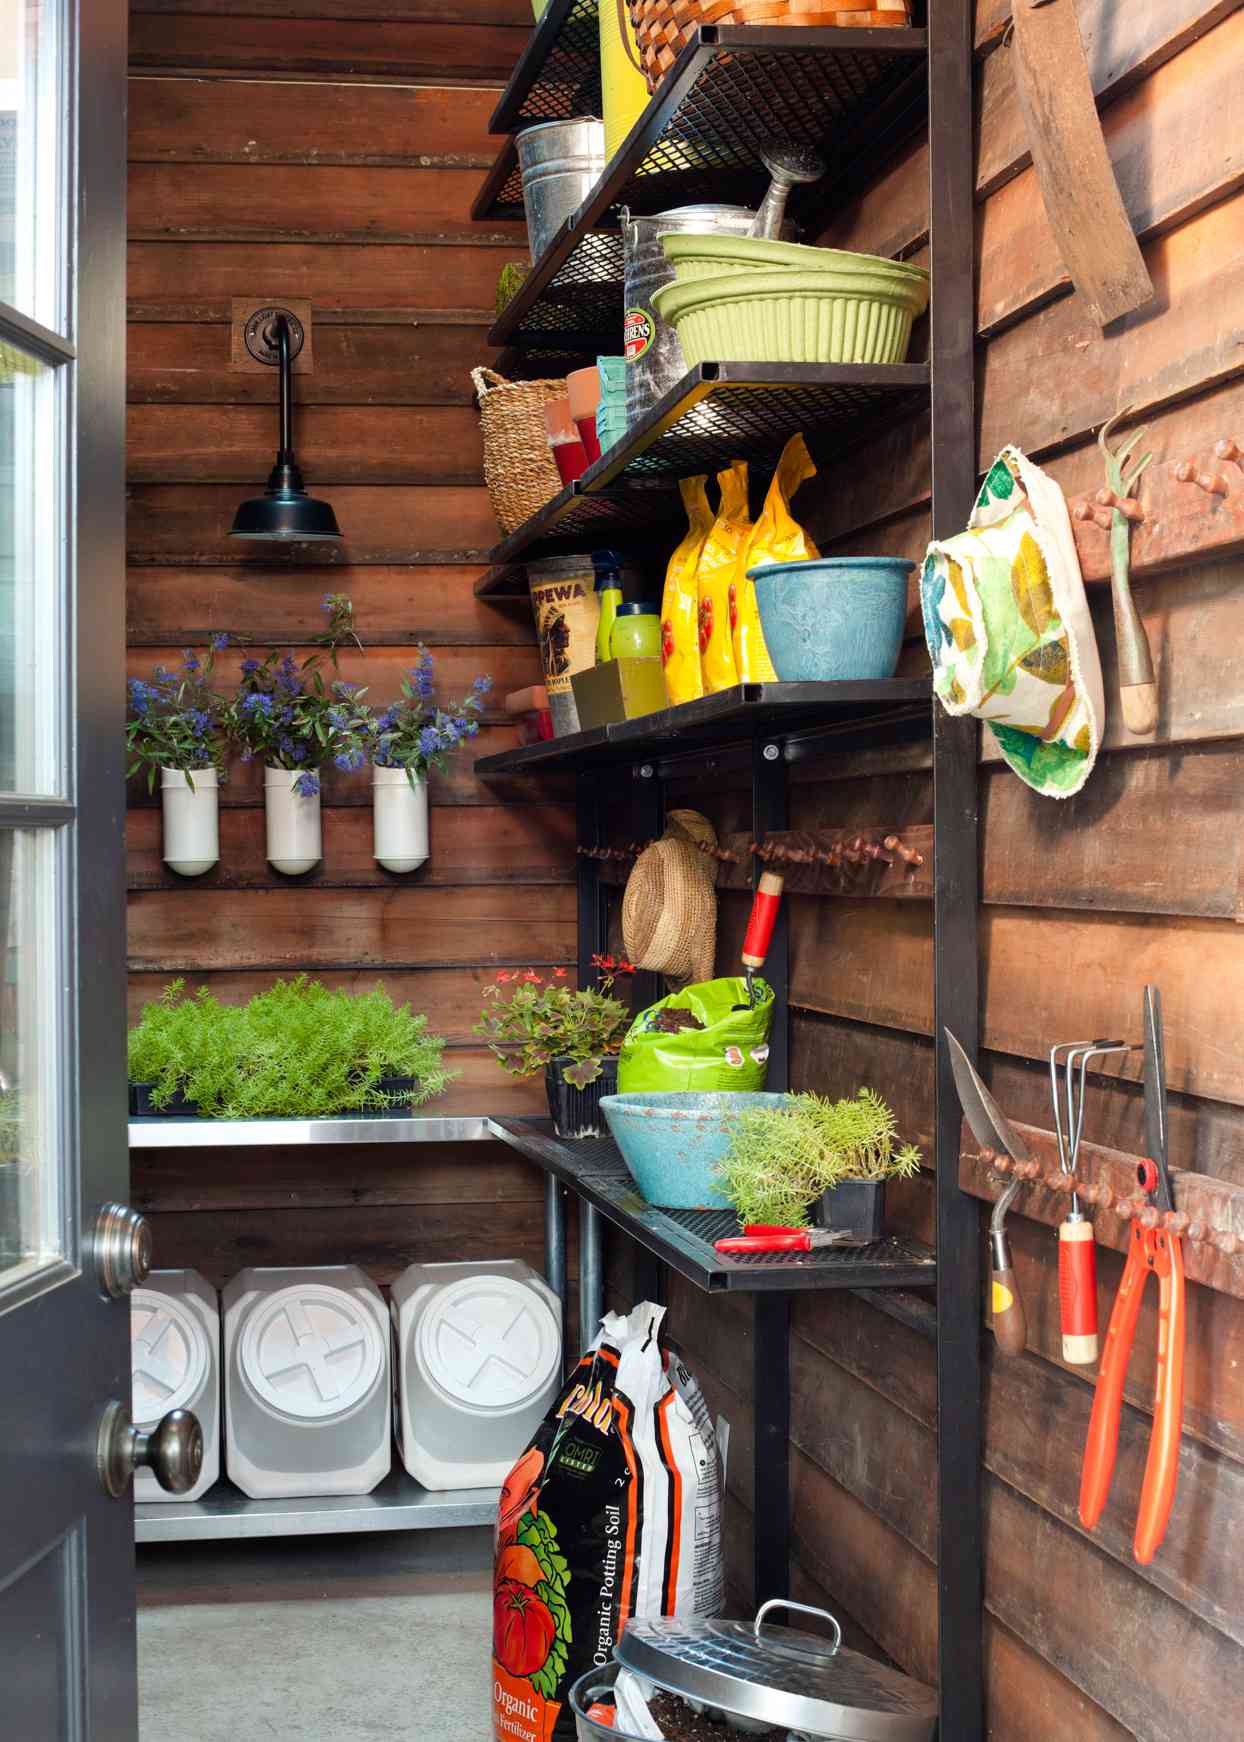 shed with slim metal counter and shelves with tools and pots